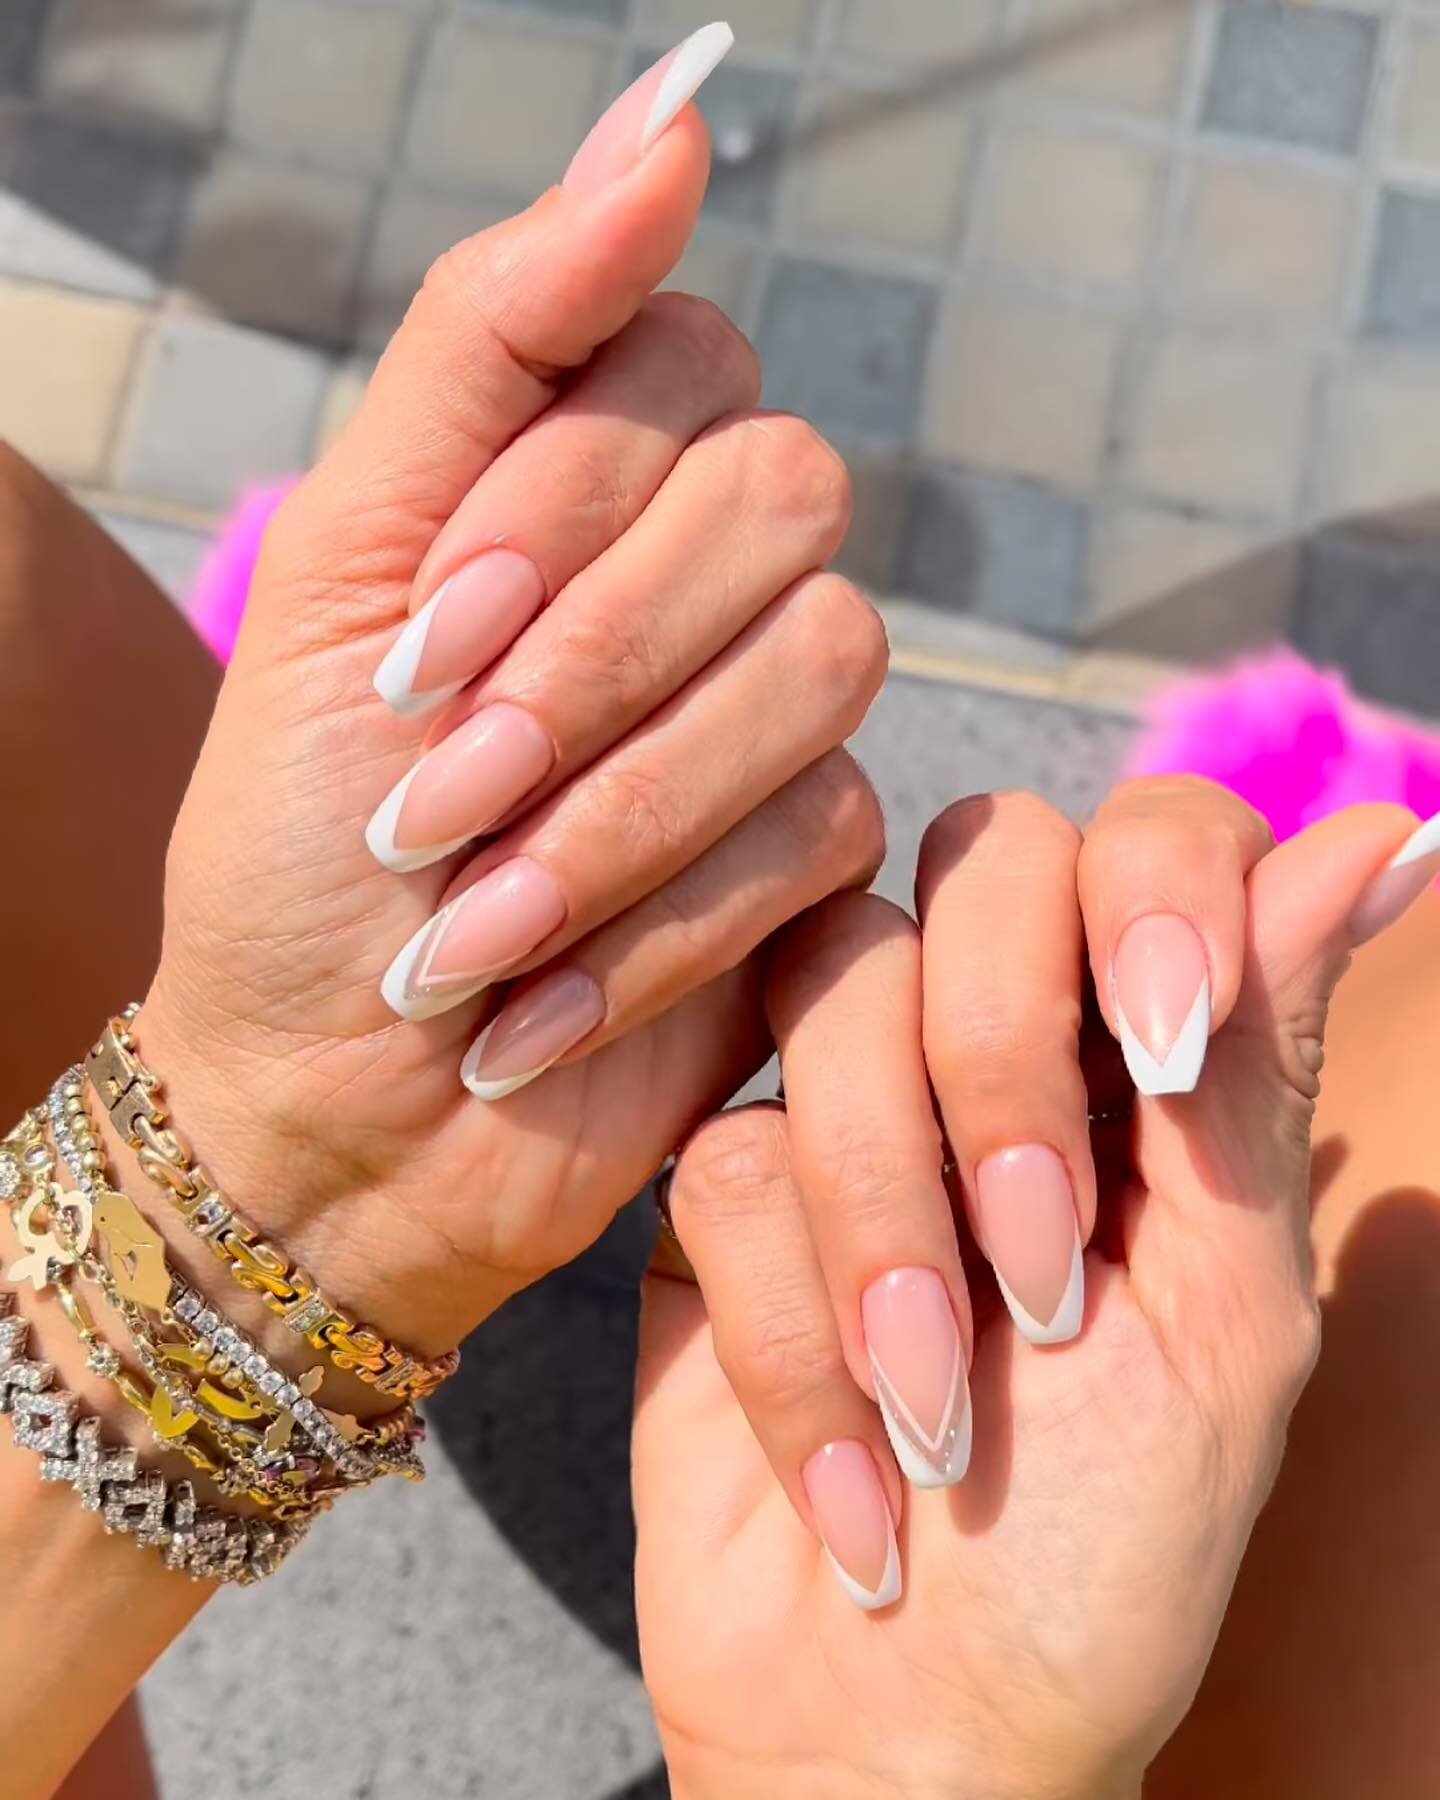 Gorgeous NG nails by the talented nail artists at our NEW Porter Ranch location🤍✨Call and book your appts☎️818.488.1140 OR book at nailgarden.com OR on our NG App! #nailgarden #nails #beauty #beautiful #nailgame #spa #spaday #nailtech #manicurist #n